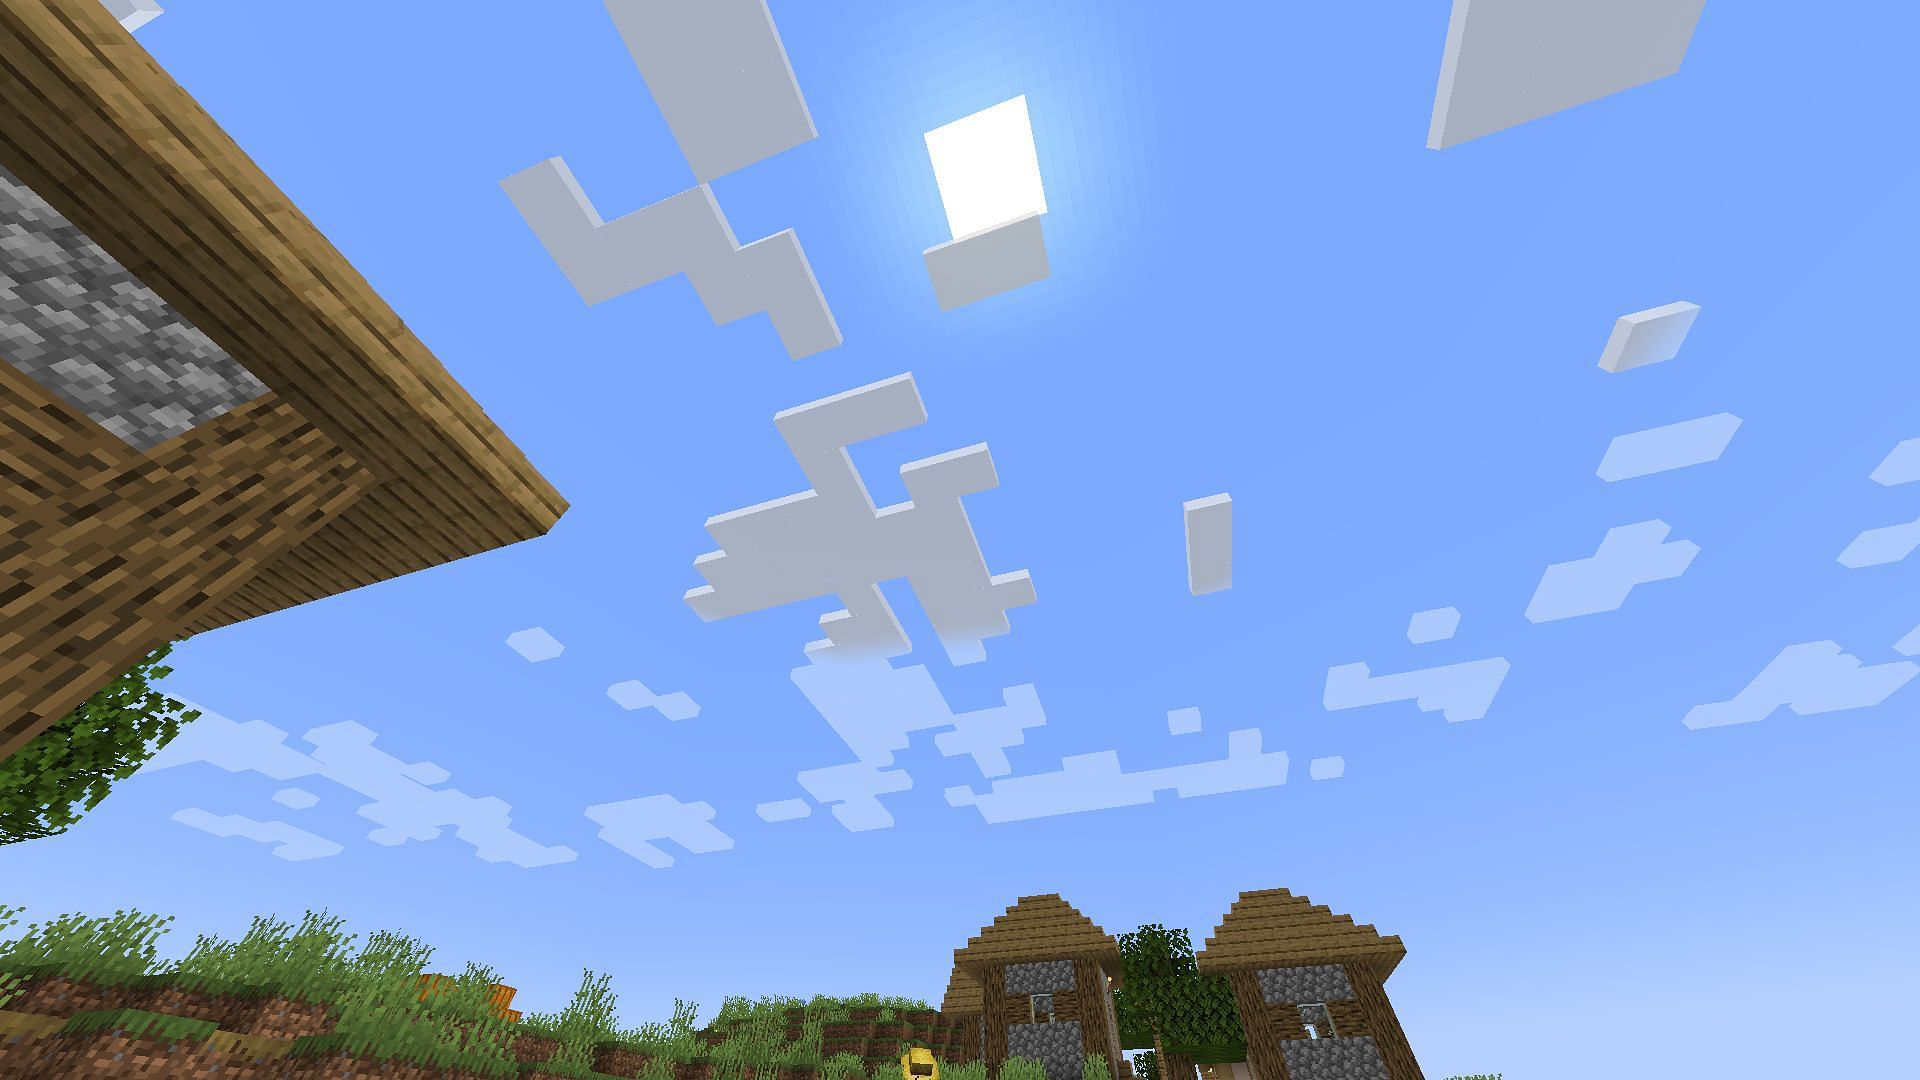 The time of day is quite important for villagers in Minecraft (Image via Mojang)